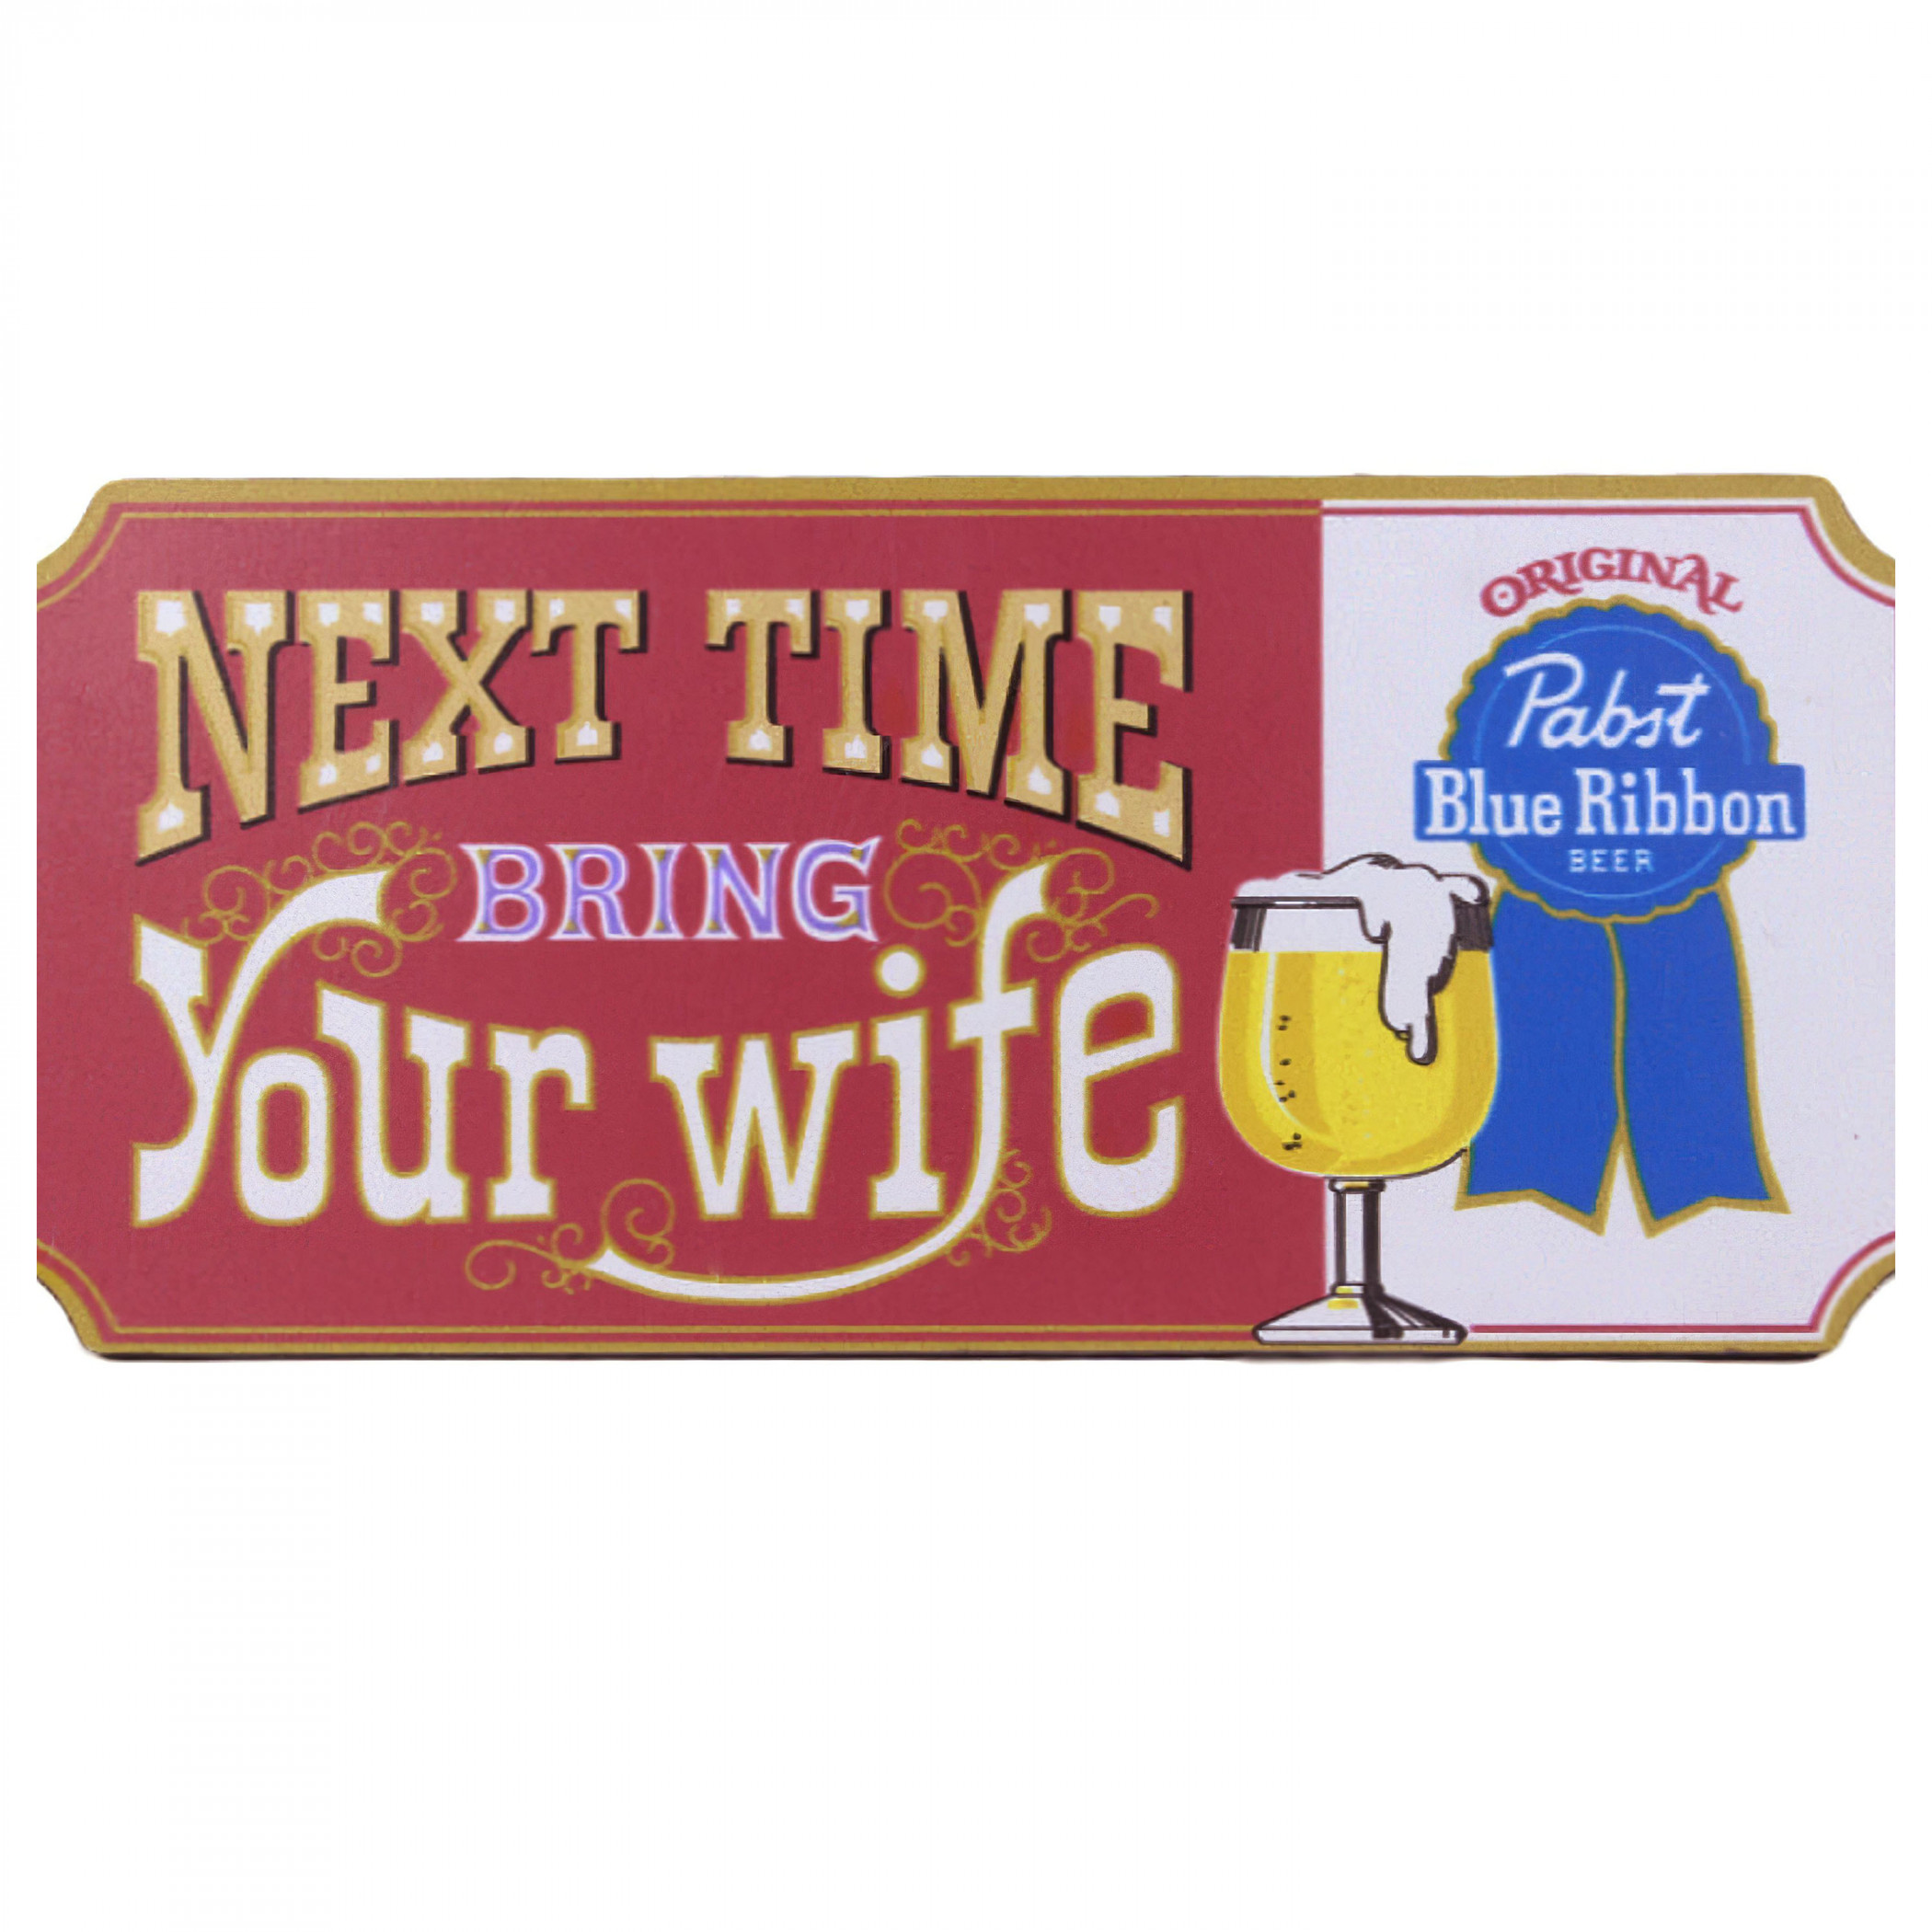 Pabst Blue Ribbon Bring Your Wife Magnet